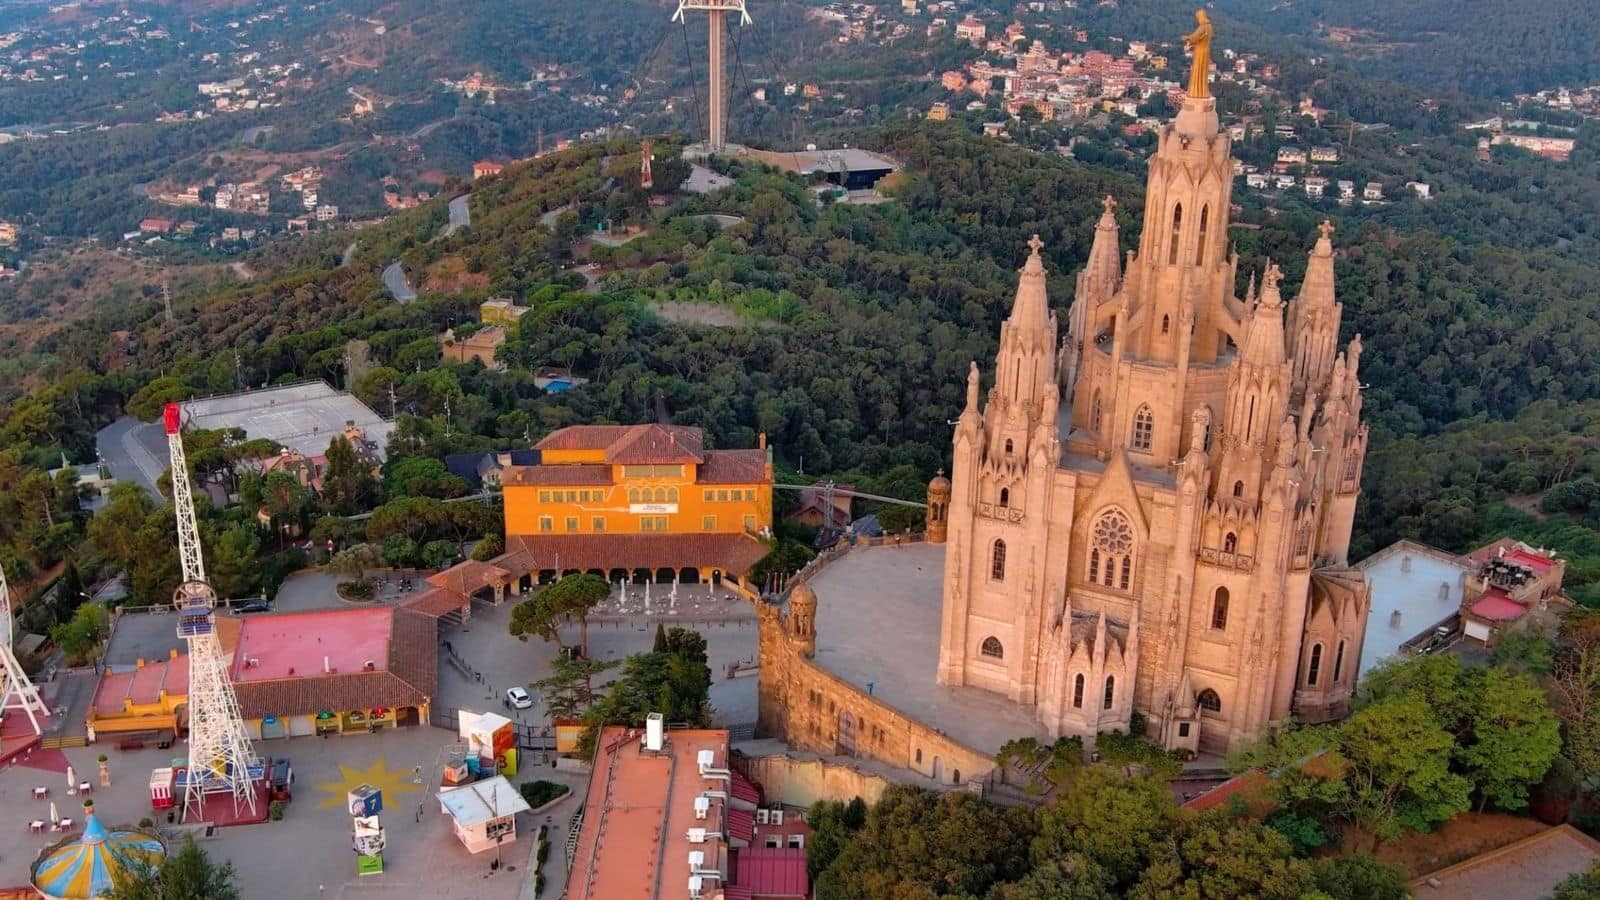 Discover Barcelona's cultural gems with this travel guide